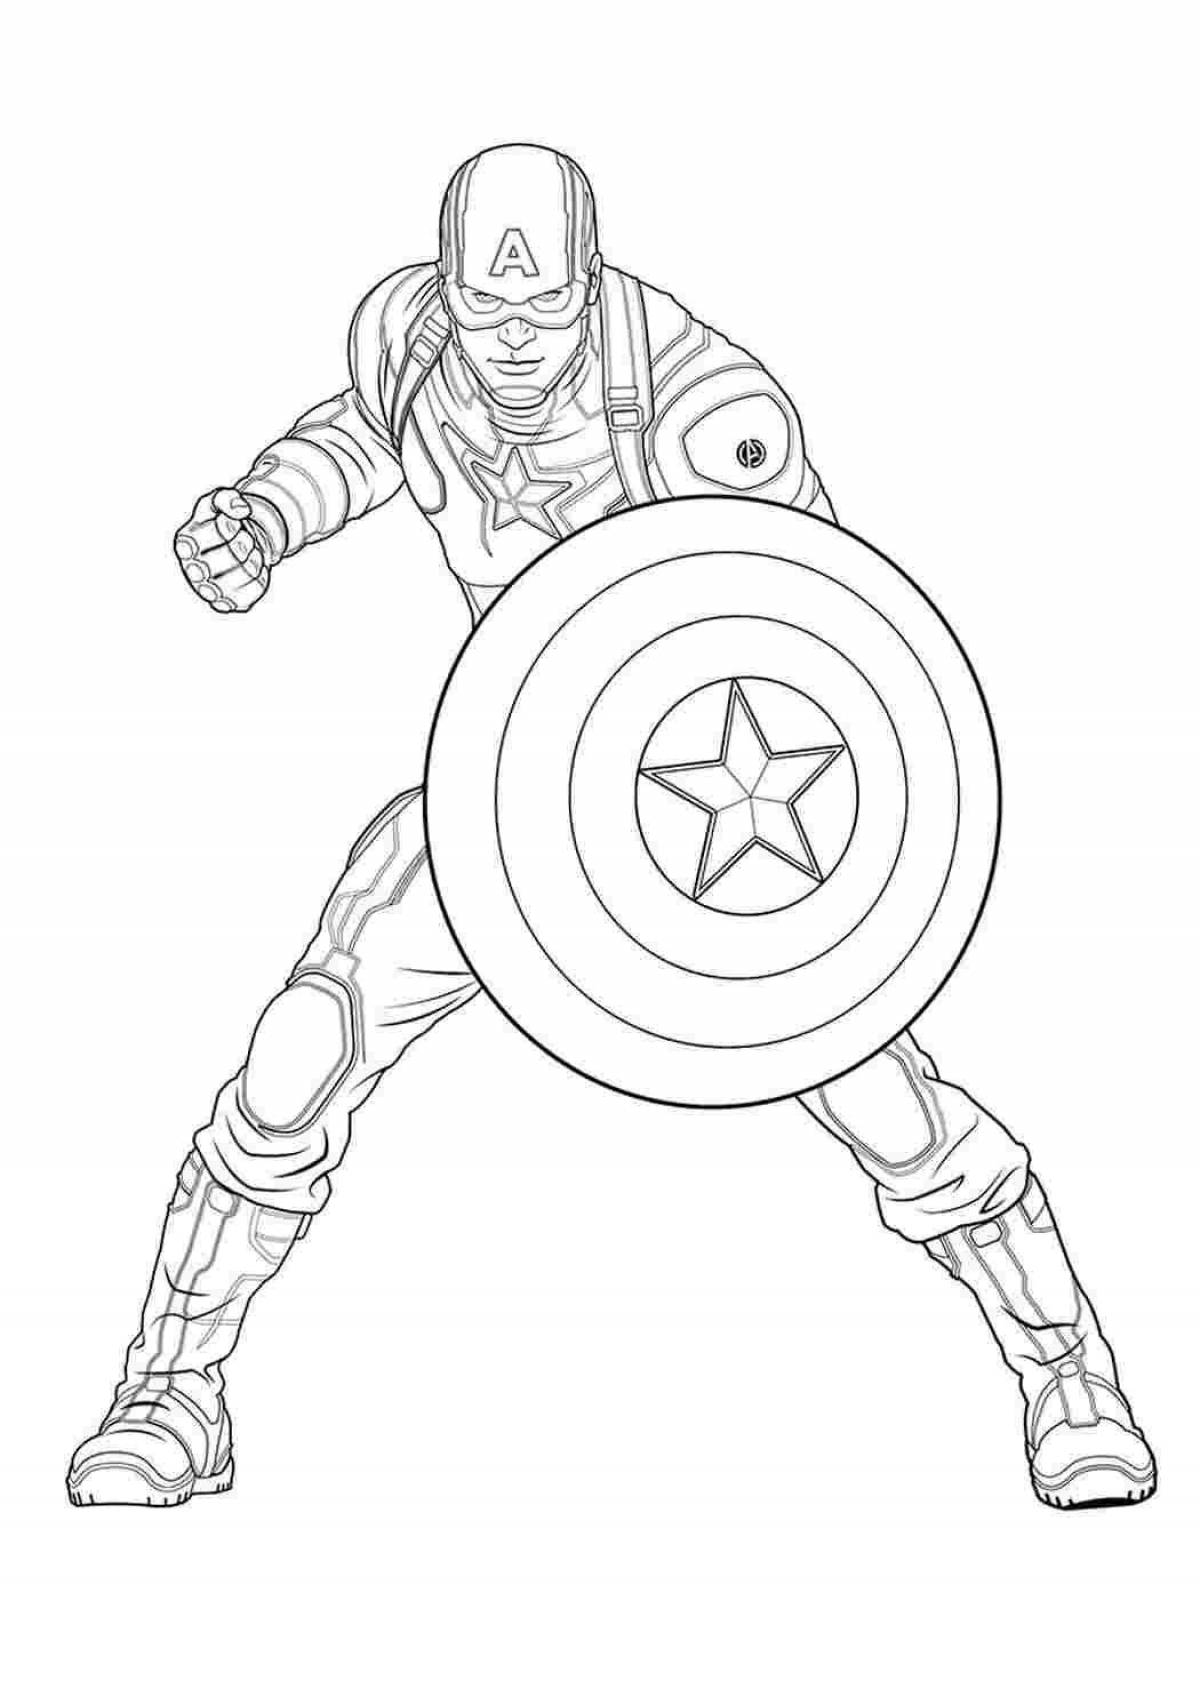 Avengers coloring pages for boys